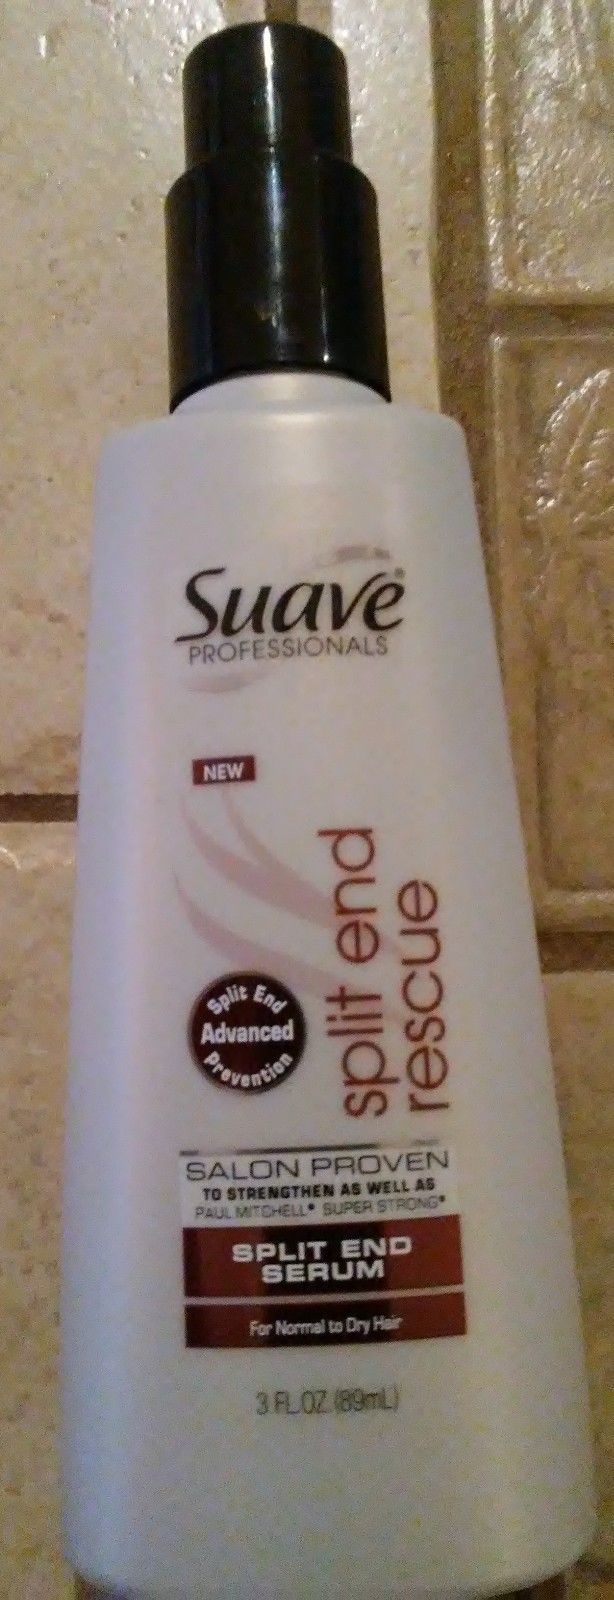 Suave Professionals Split End Rescue Serum for Normal to Dry Hair 3 fl oz